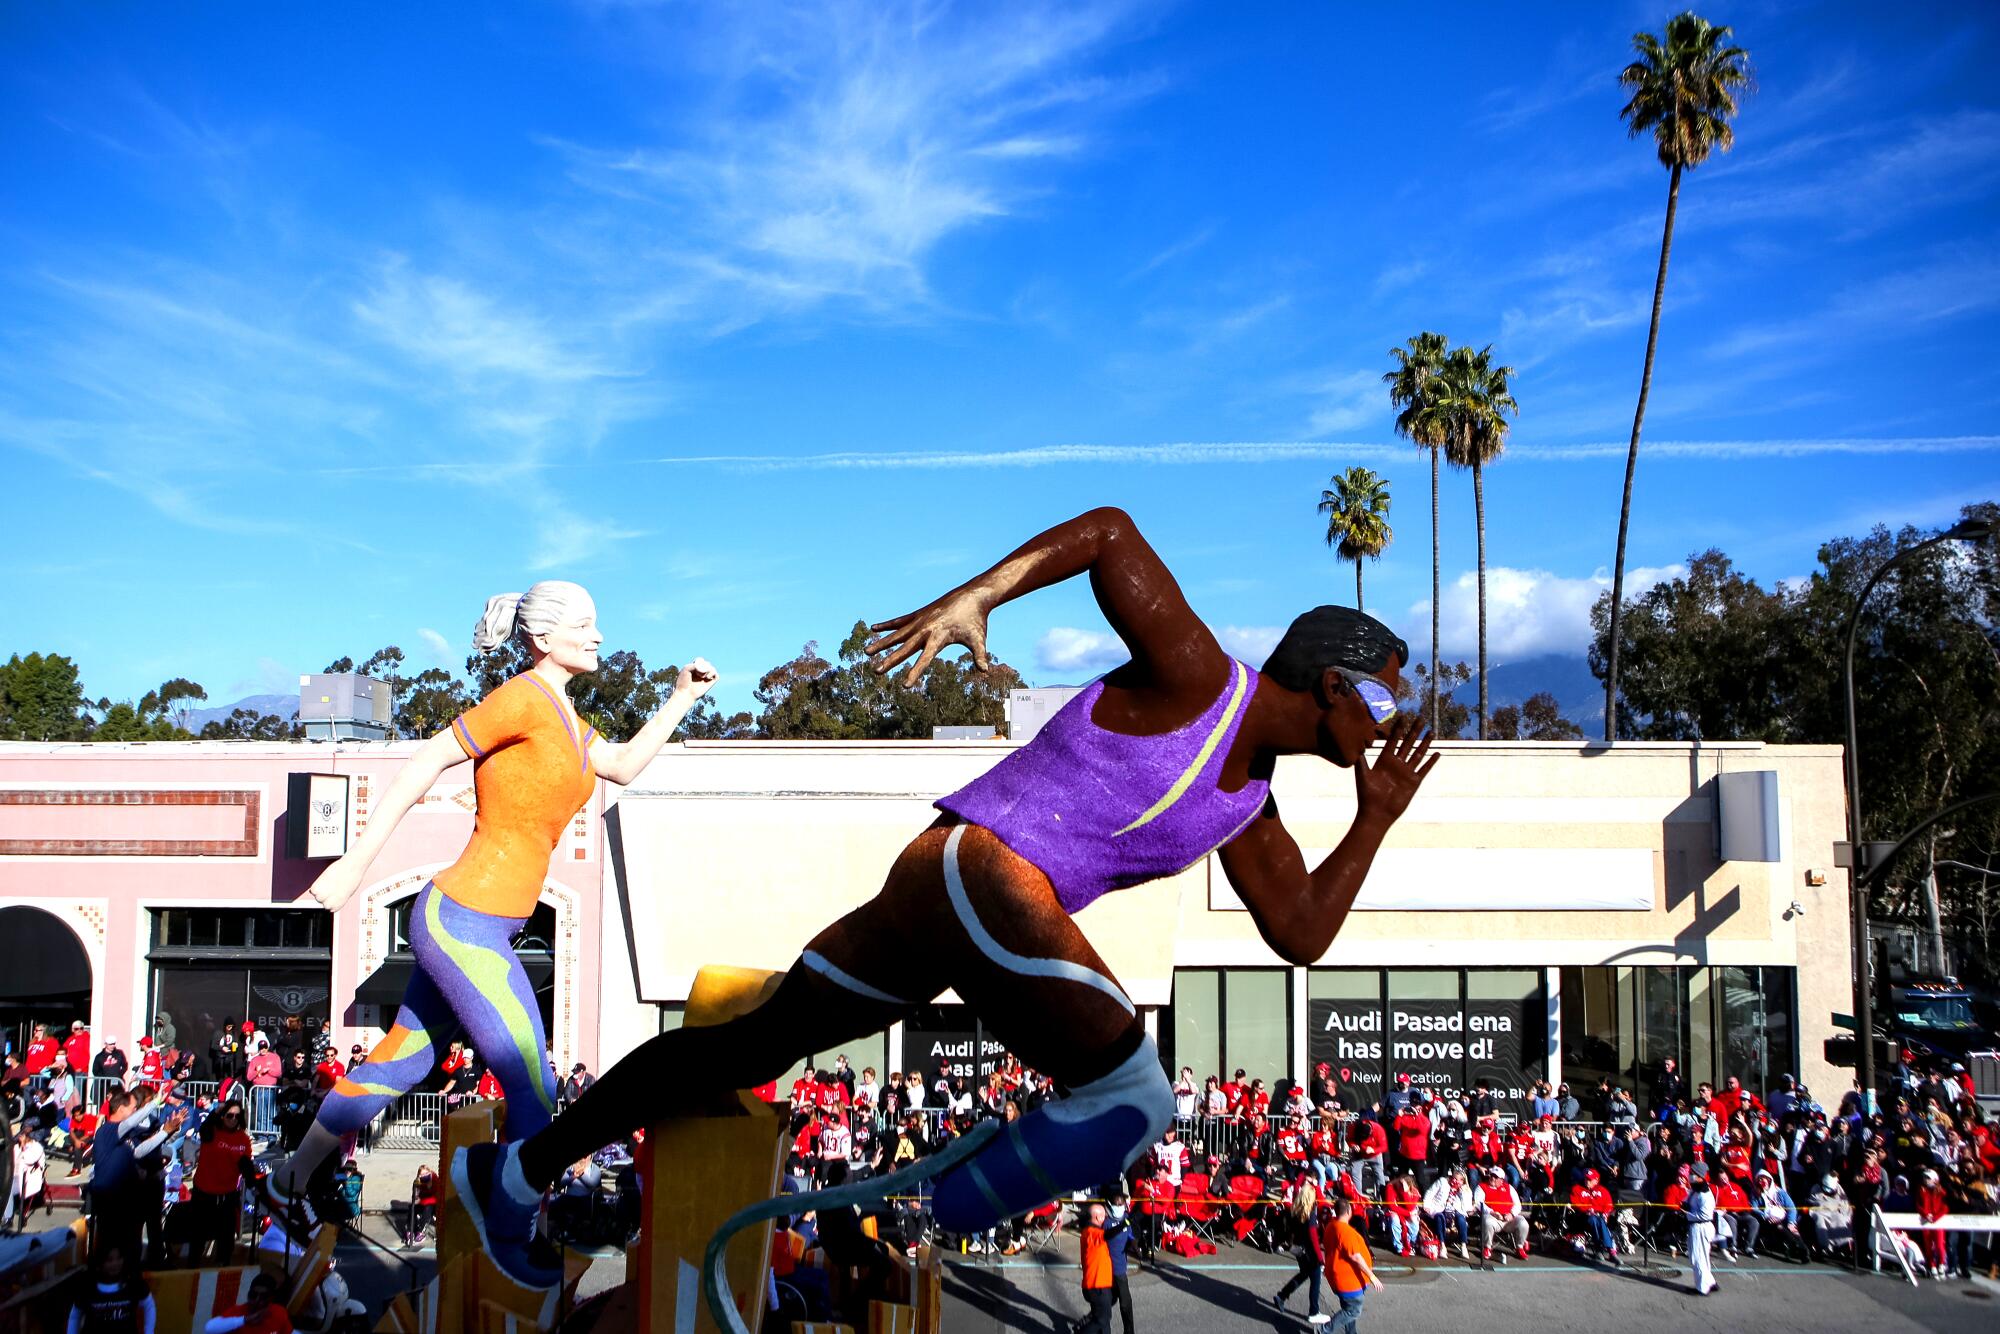 California Physical Therapy Association float 'Physical Therapist Improve The Way You Move" at the 2022 Rose Bowl Parade 